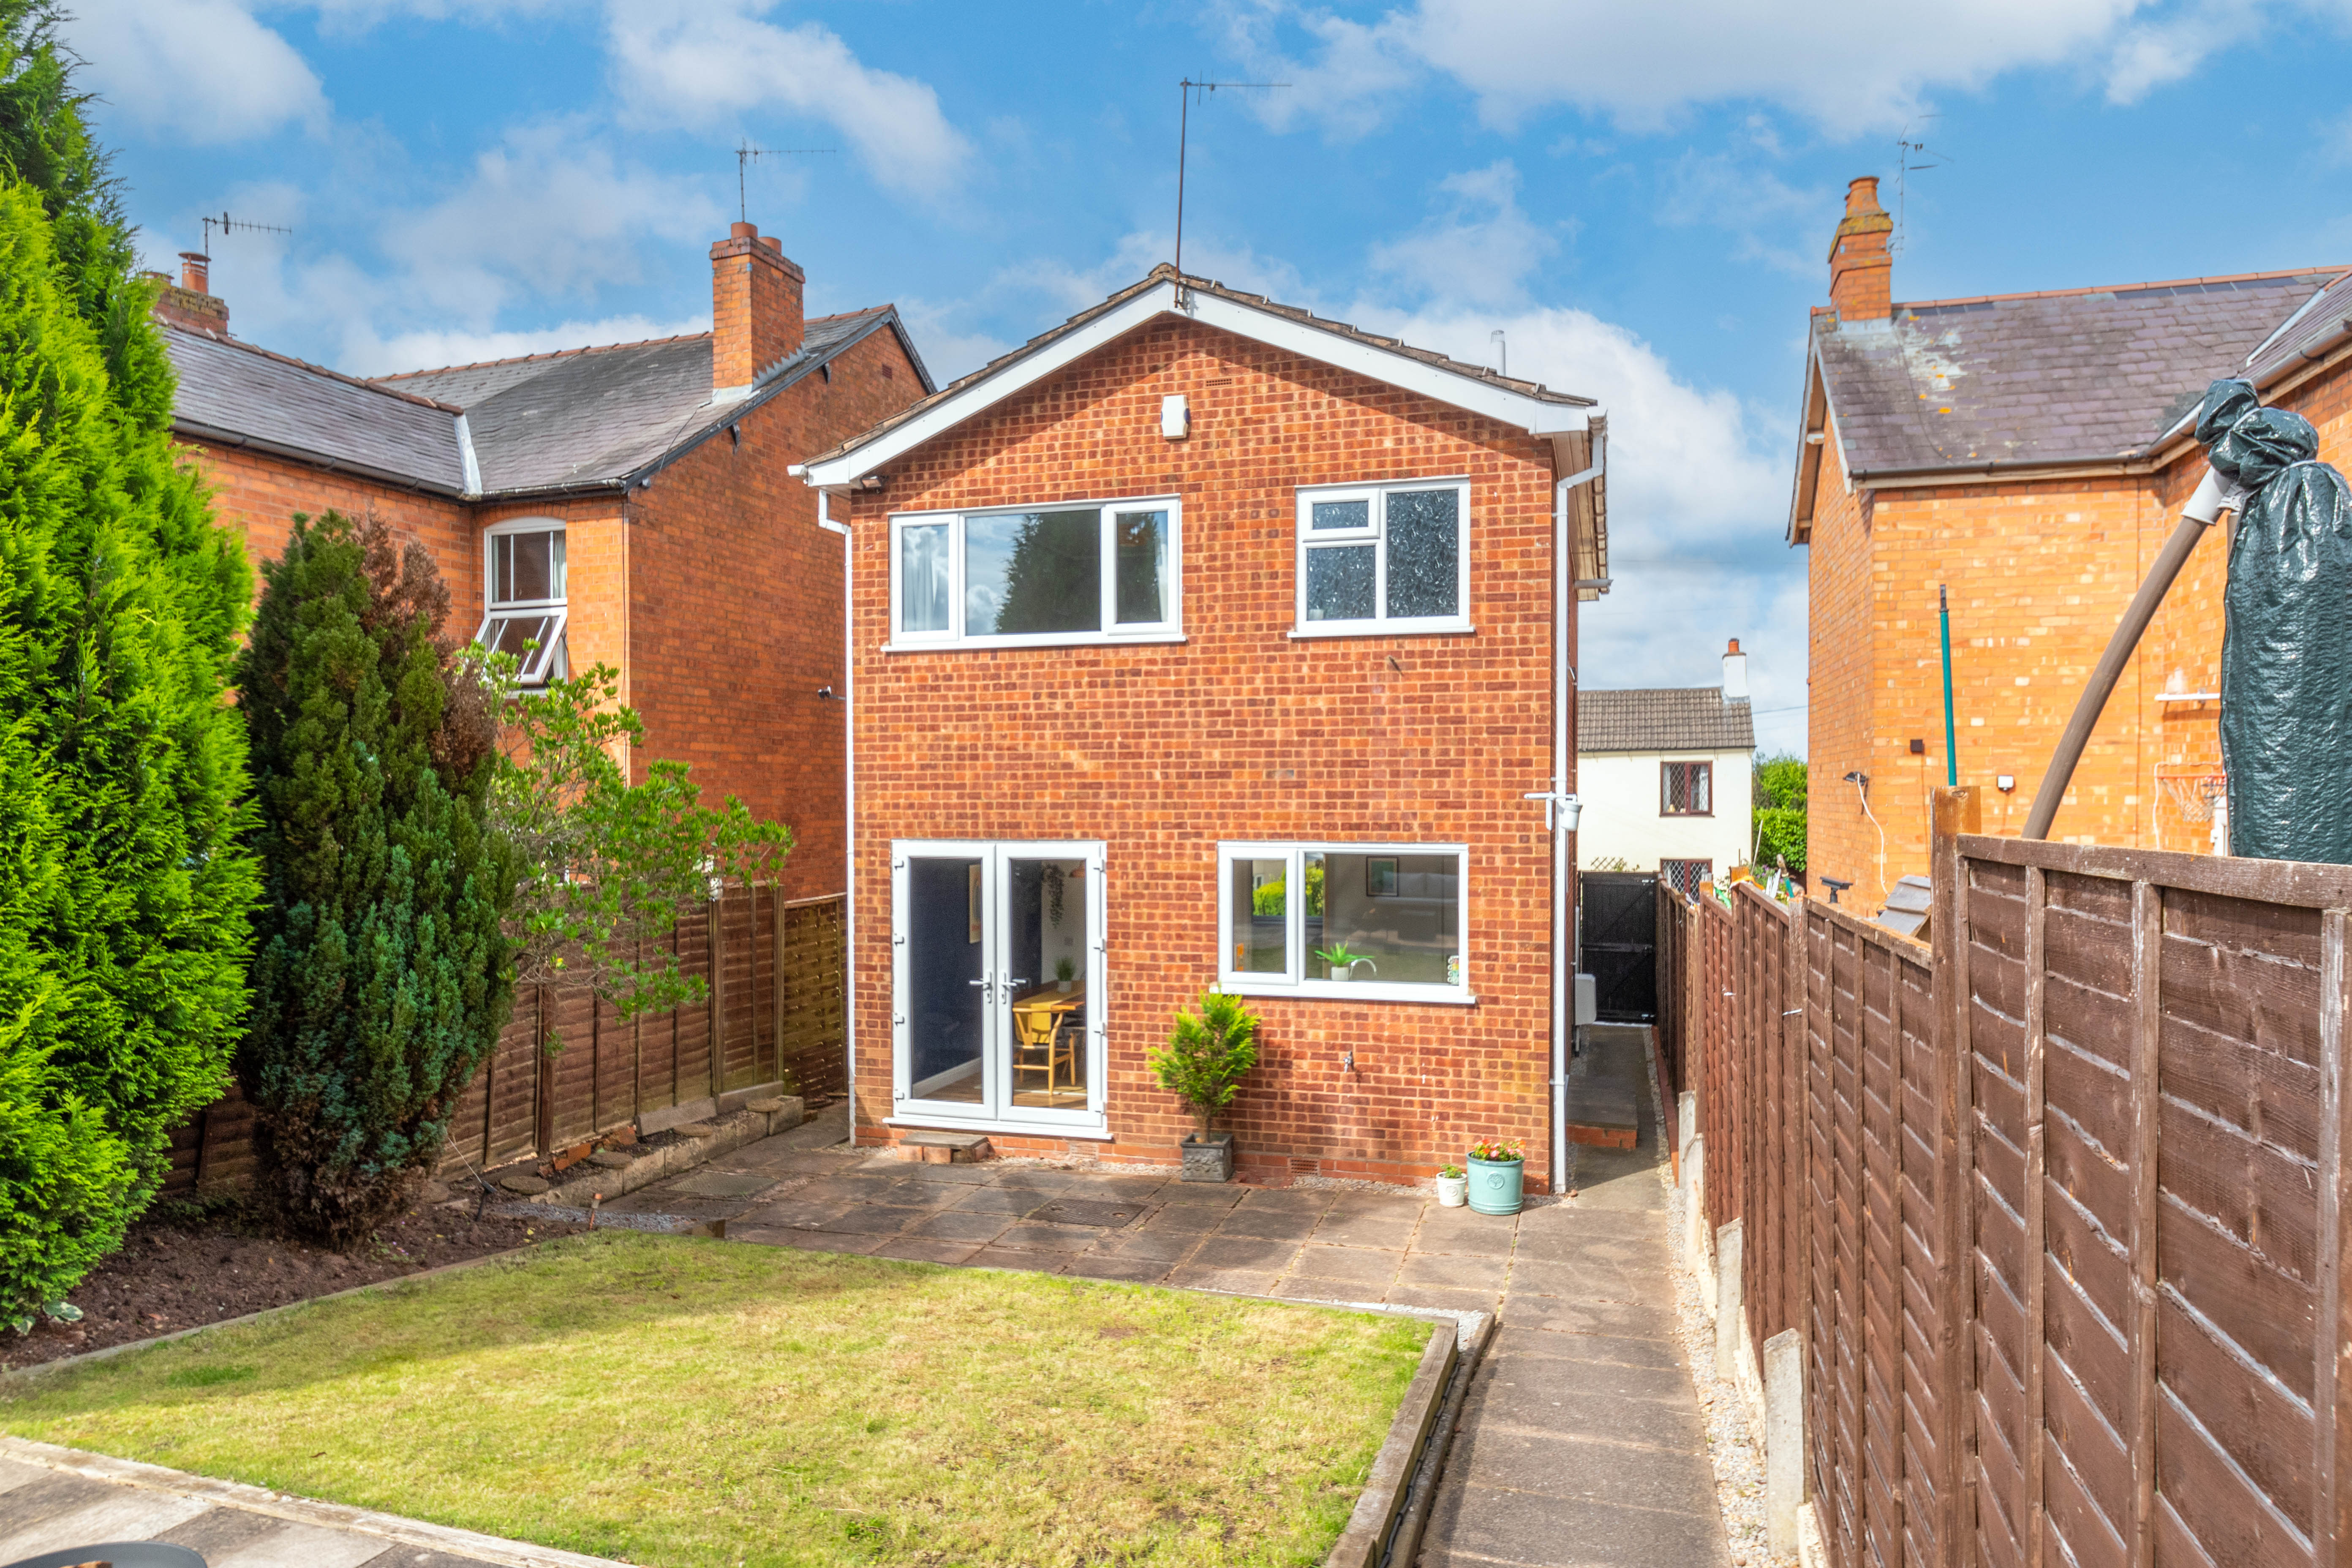 3 bed house for sale in Stourbridge Road, Bromsgrove 12